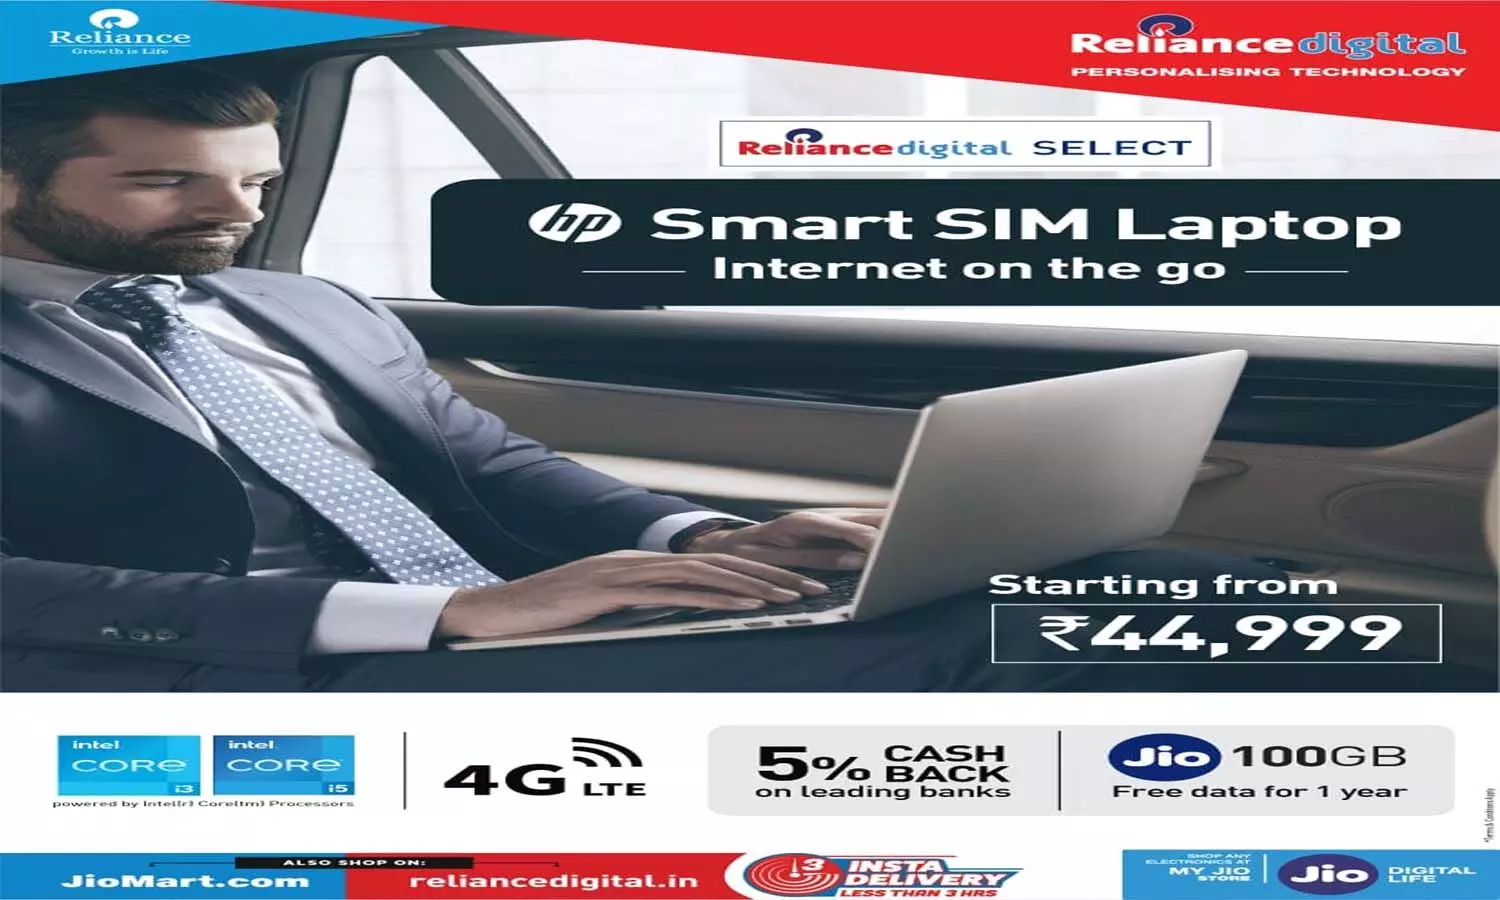 100 GB free data will be available in Reliance Digitals “Jio HP Smart SIM Laptop” offer